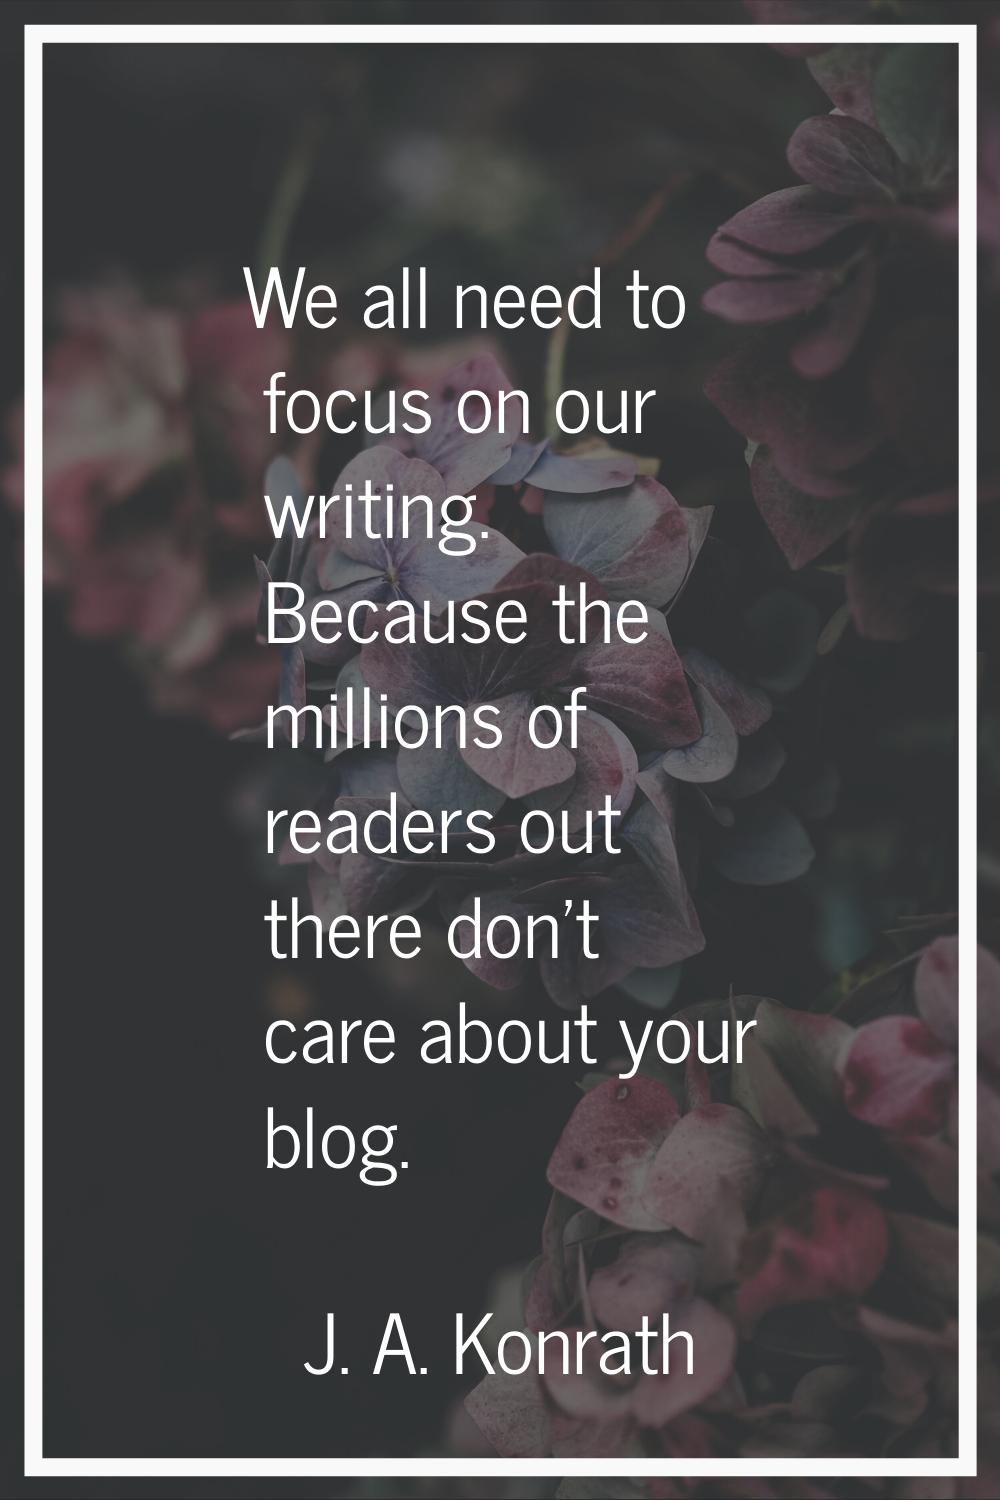 We all need to focus on our writing. Because the millions of readers out there don't care about you